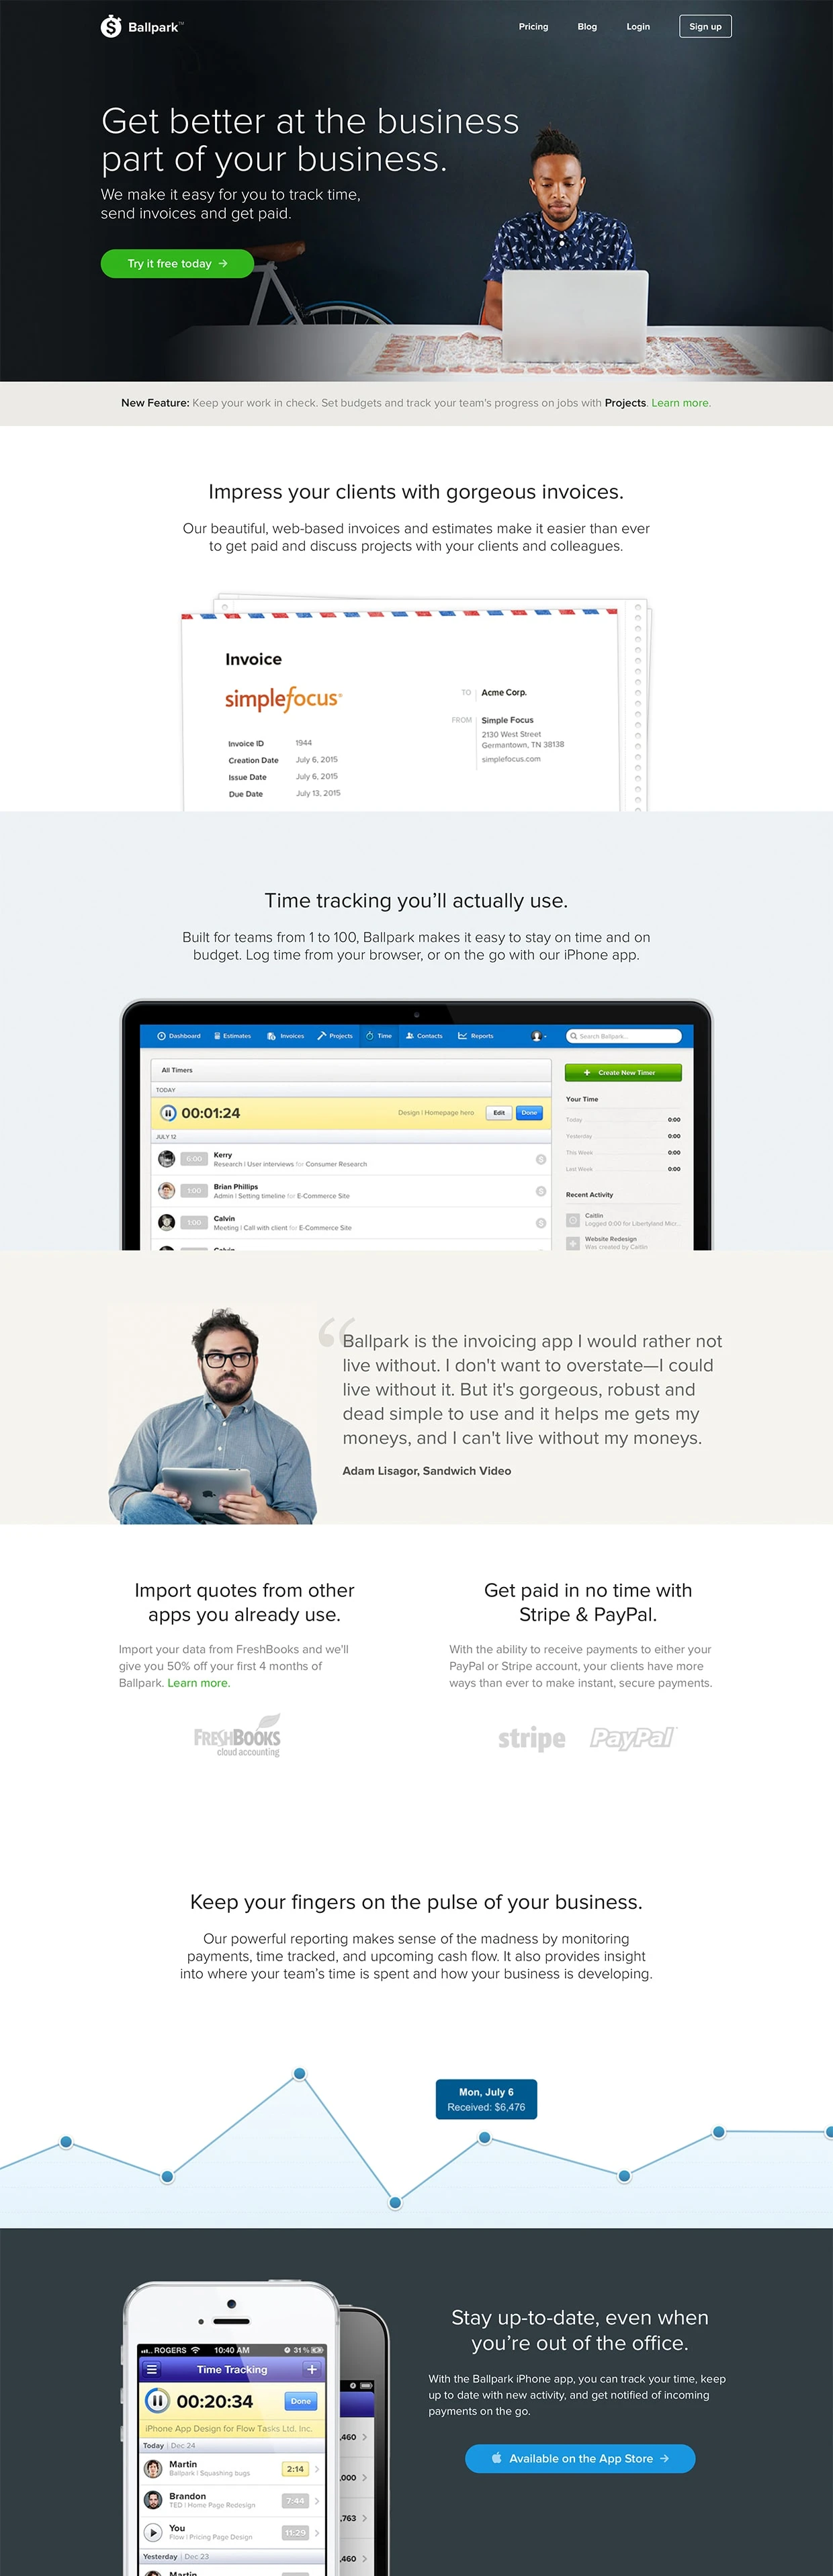 Ballpark Landing Page Example: Ballpark is an online time tracking and invoicing software program that is used by thousands of successful freelancers and companies worldwide. Ballpark gives you everything you need to run your small business.